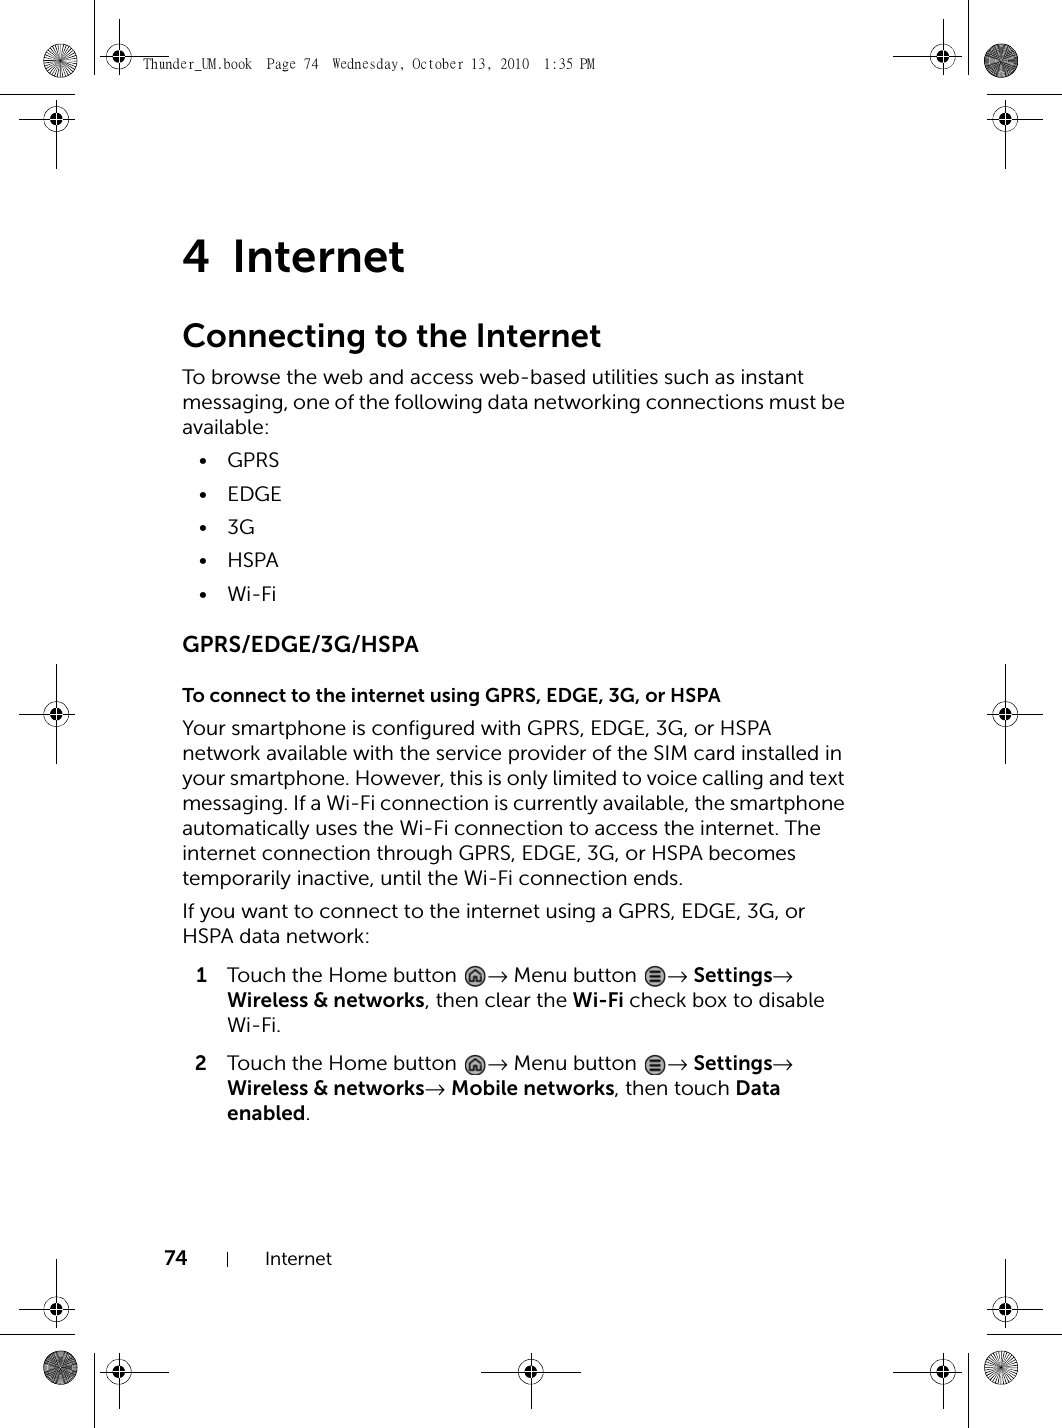 74 Internet4InternetConnecting to the InternetTo browse the web and access web-based utilities such as instant messaging, one of the following data networking connections must be available:•GPRS•EDGE•3G•HSPA•Wi-FiGPRS/EDGE/3G/HSPATo connect to the internet using GPRS, EDGE, 3G, or HSPAYour smartphone is configured with GPRS, EDGE, 3G, or HSPA network available with the service provider of the SIM card installed in your smartphone. However, this is only limited to voice calling and text messaging. If a Wi-Fi connection is currently available, the smartphone automatically uses the Wi-Fi connection to access the internet. The internet connection through GPRS, EDGE, 3G, or HSPA becomes temporarily inactive, until the Wi-Fi connection ends.If you want to connect to the internet using a GPRS, EDGE, 3G, or HSPA data network:1Touch the Home button  → Menu button  → Settings→ Wireless &amp; networks, then clear the Wi-Fi check box to disable Wi-Fi.2Touch the Home button  → Menu button  → Settings→ Wireless &amp; networks→ Mobile networks, then touch Data enabled.Thunder_UM.book  Page 74  Wednesday, October 13, 2010  1:35 PM